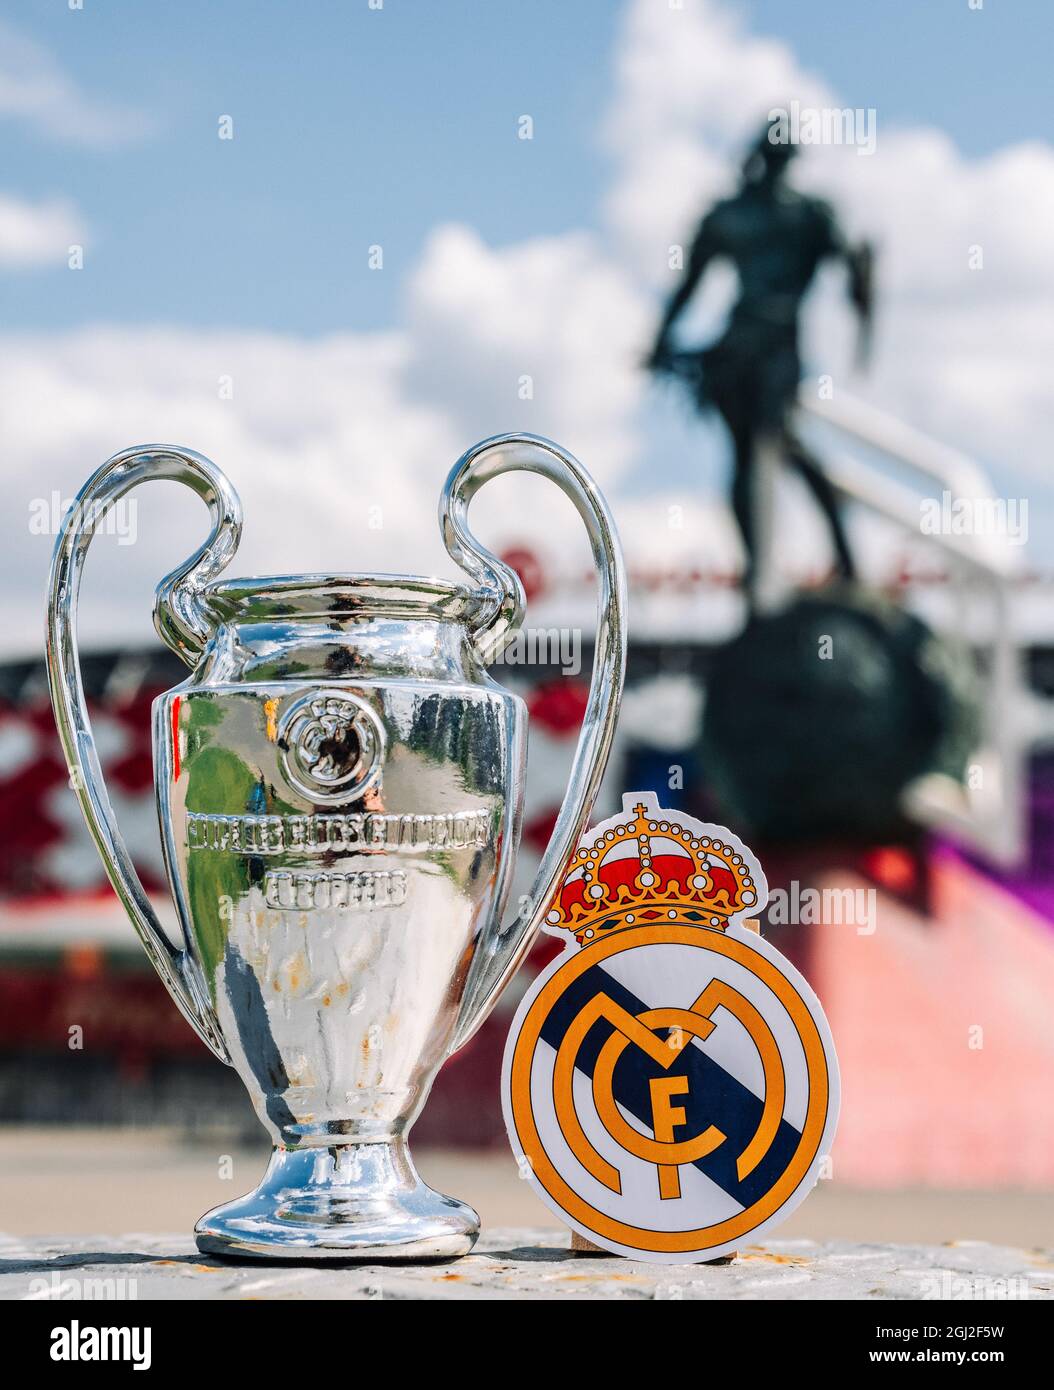 June 14, 2021 Madrid, Spain. The emblem of the Real Madrid CF football club and the UEFA Champions League Cup against the backdrop of a modern stadium Stock Photo